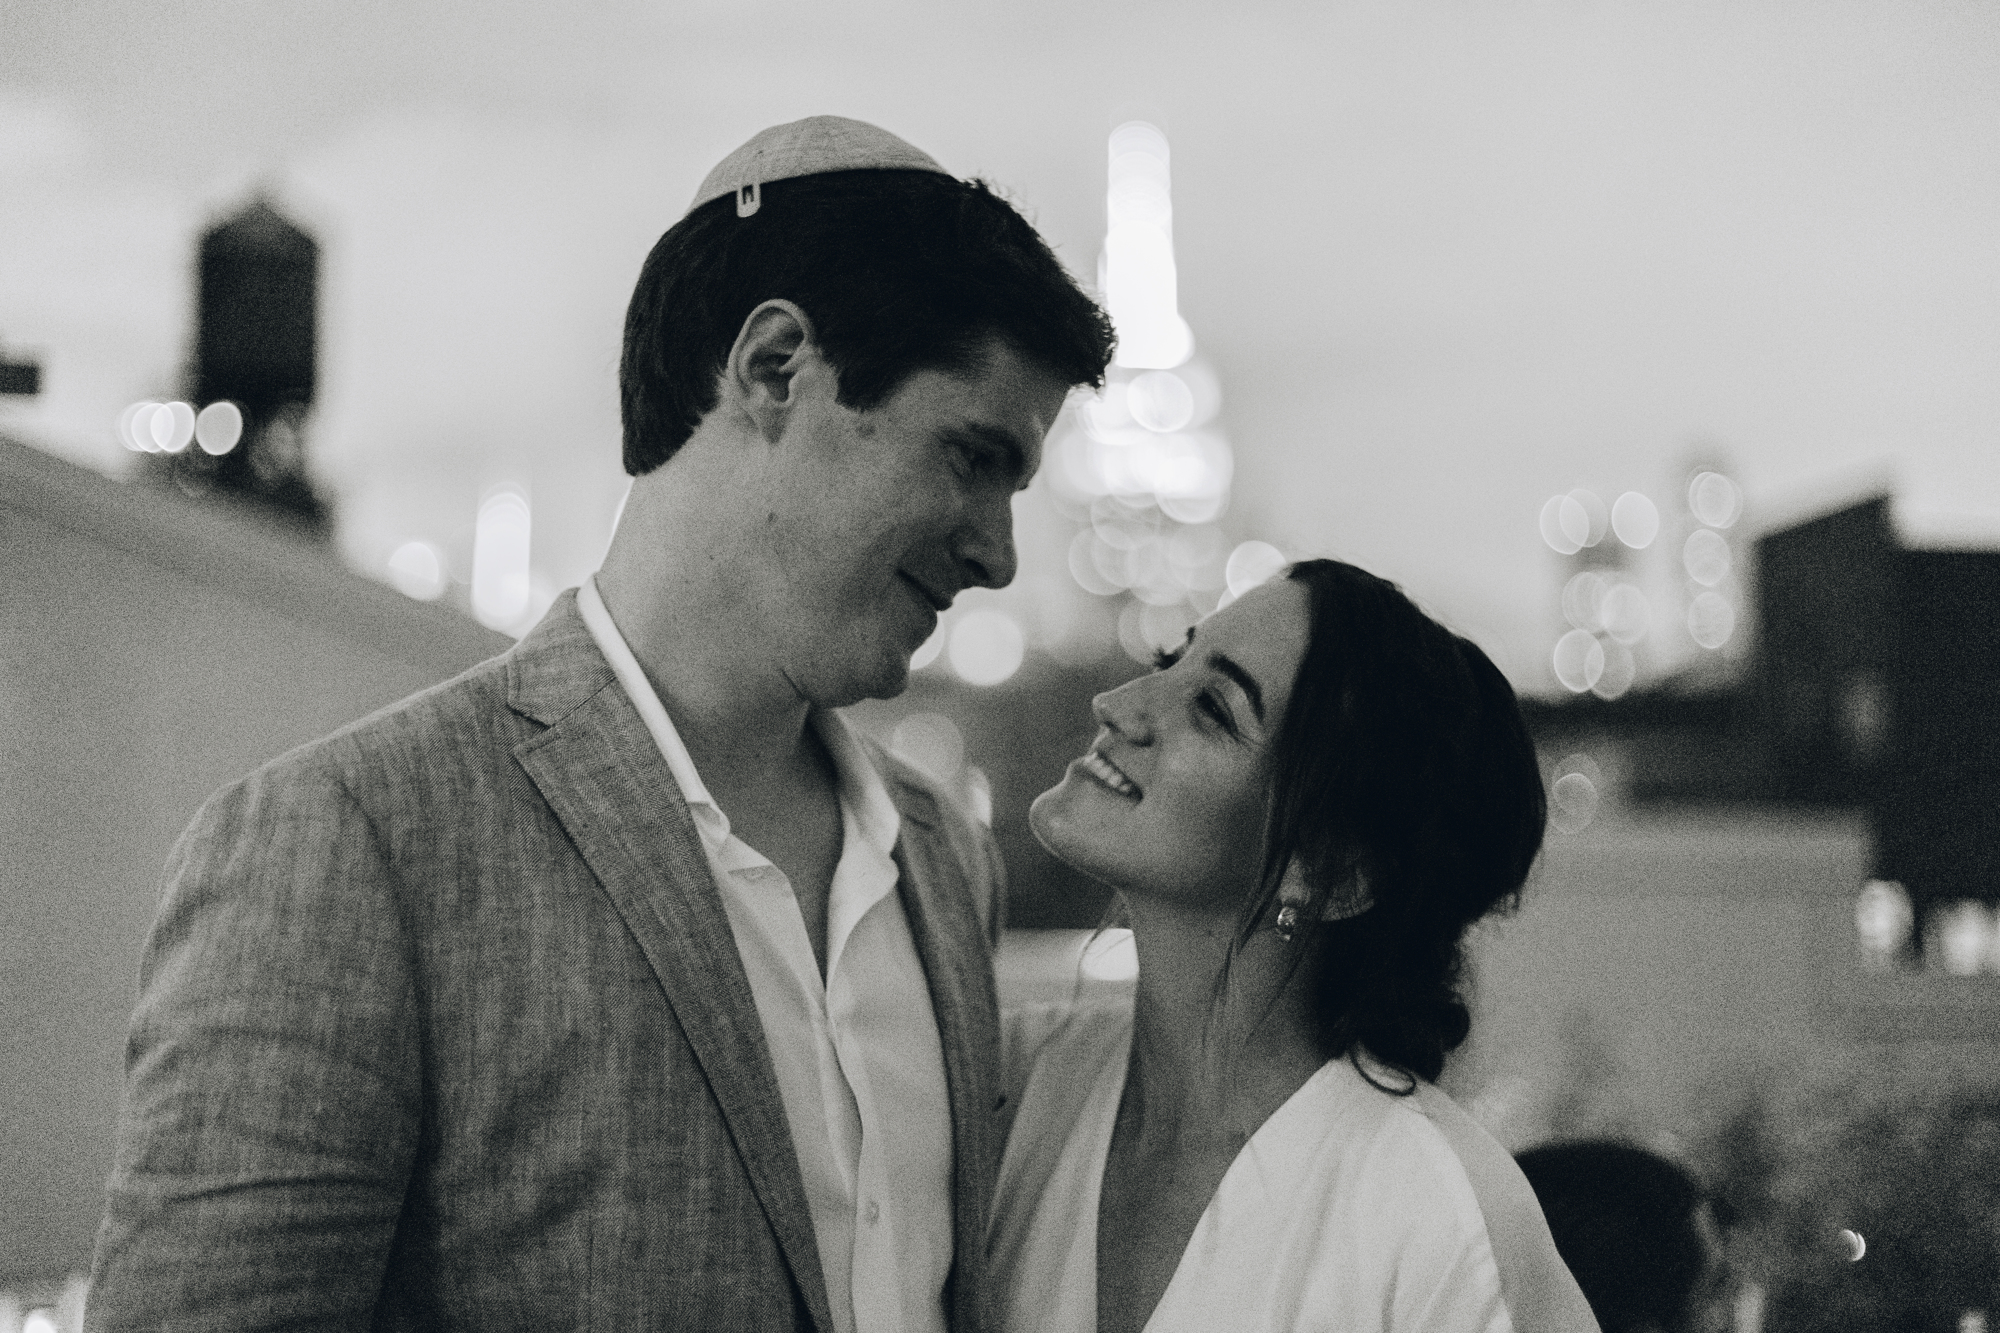 NYC rooftop elopement inspiration with Empire State Building